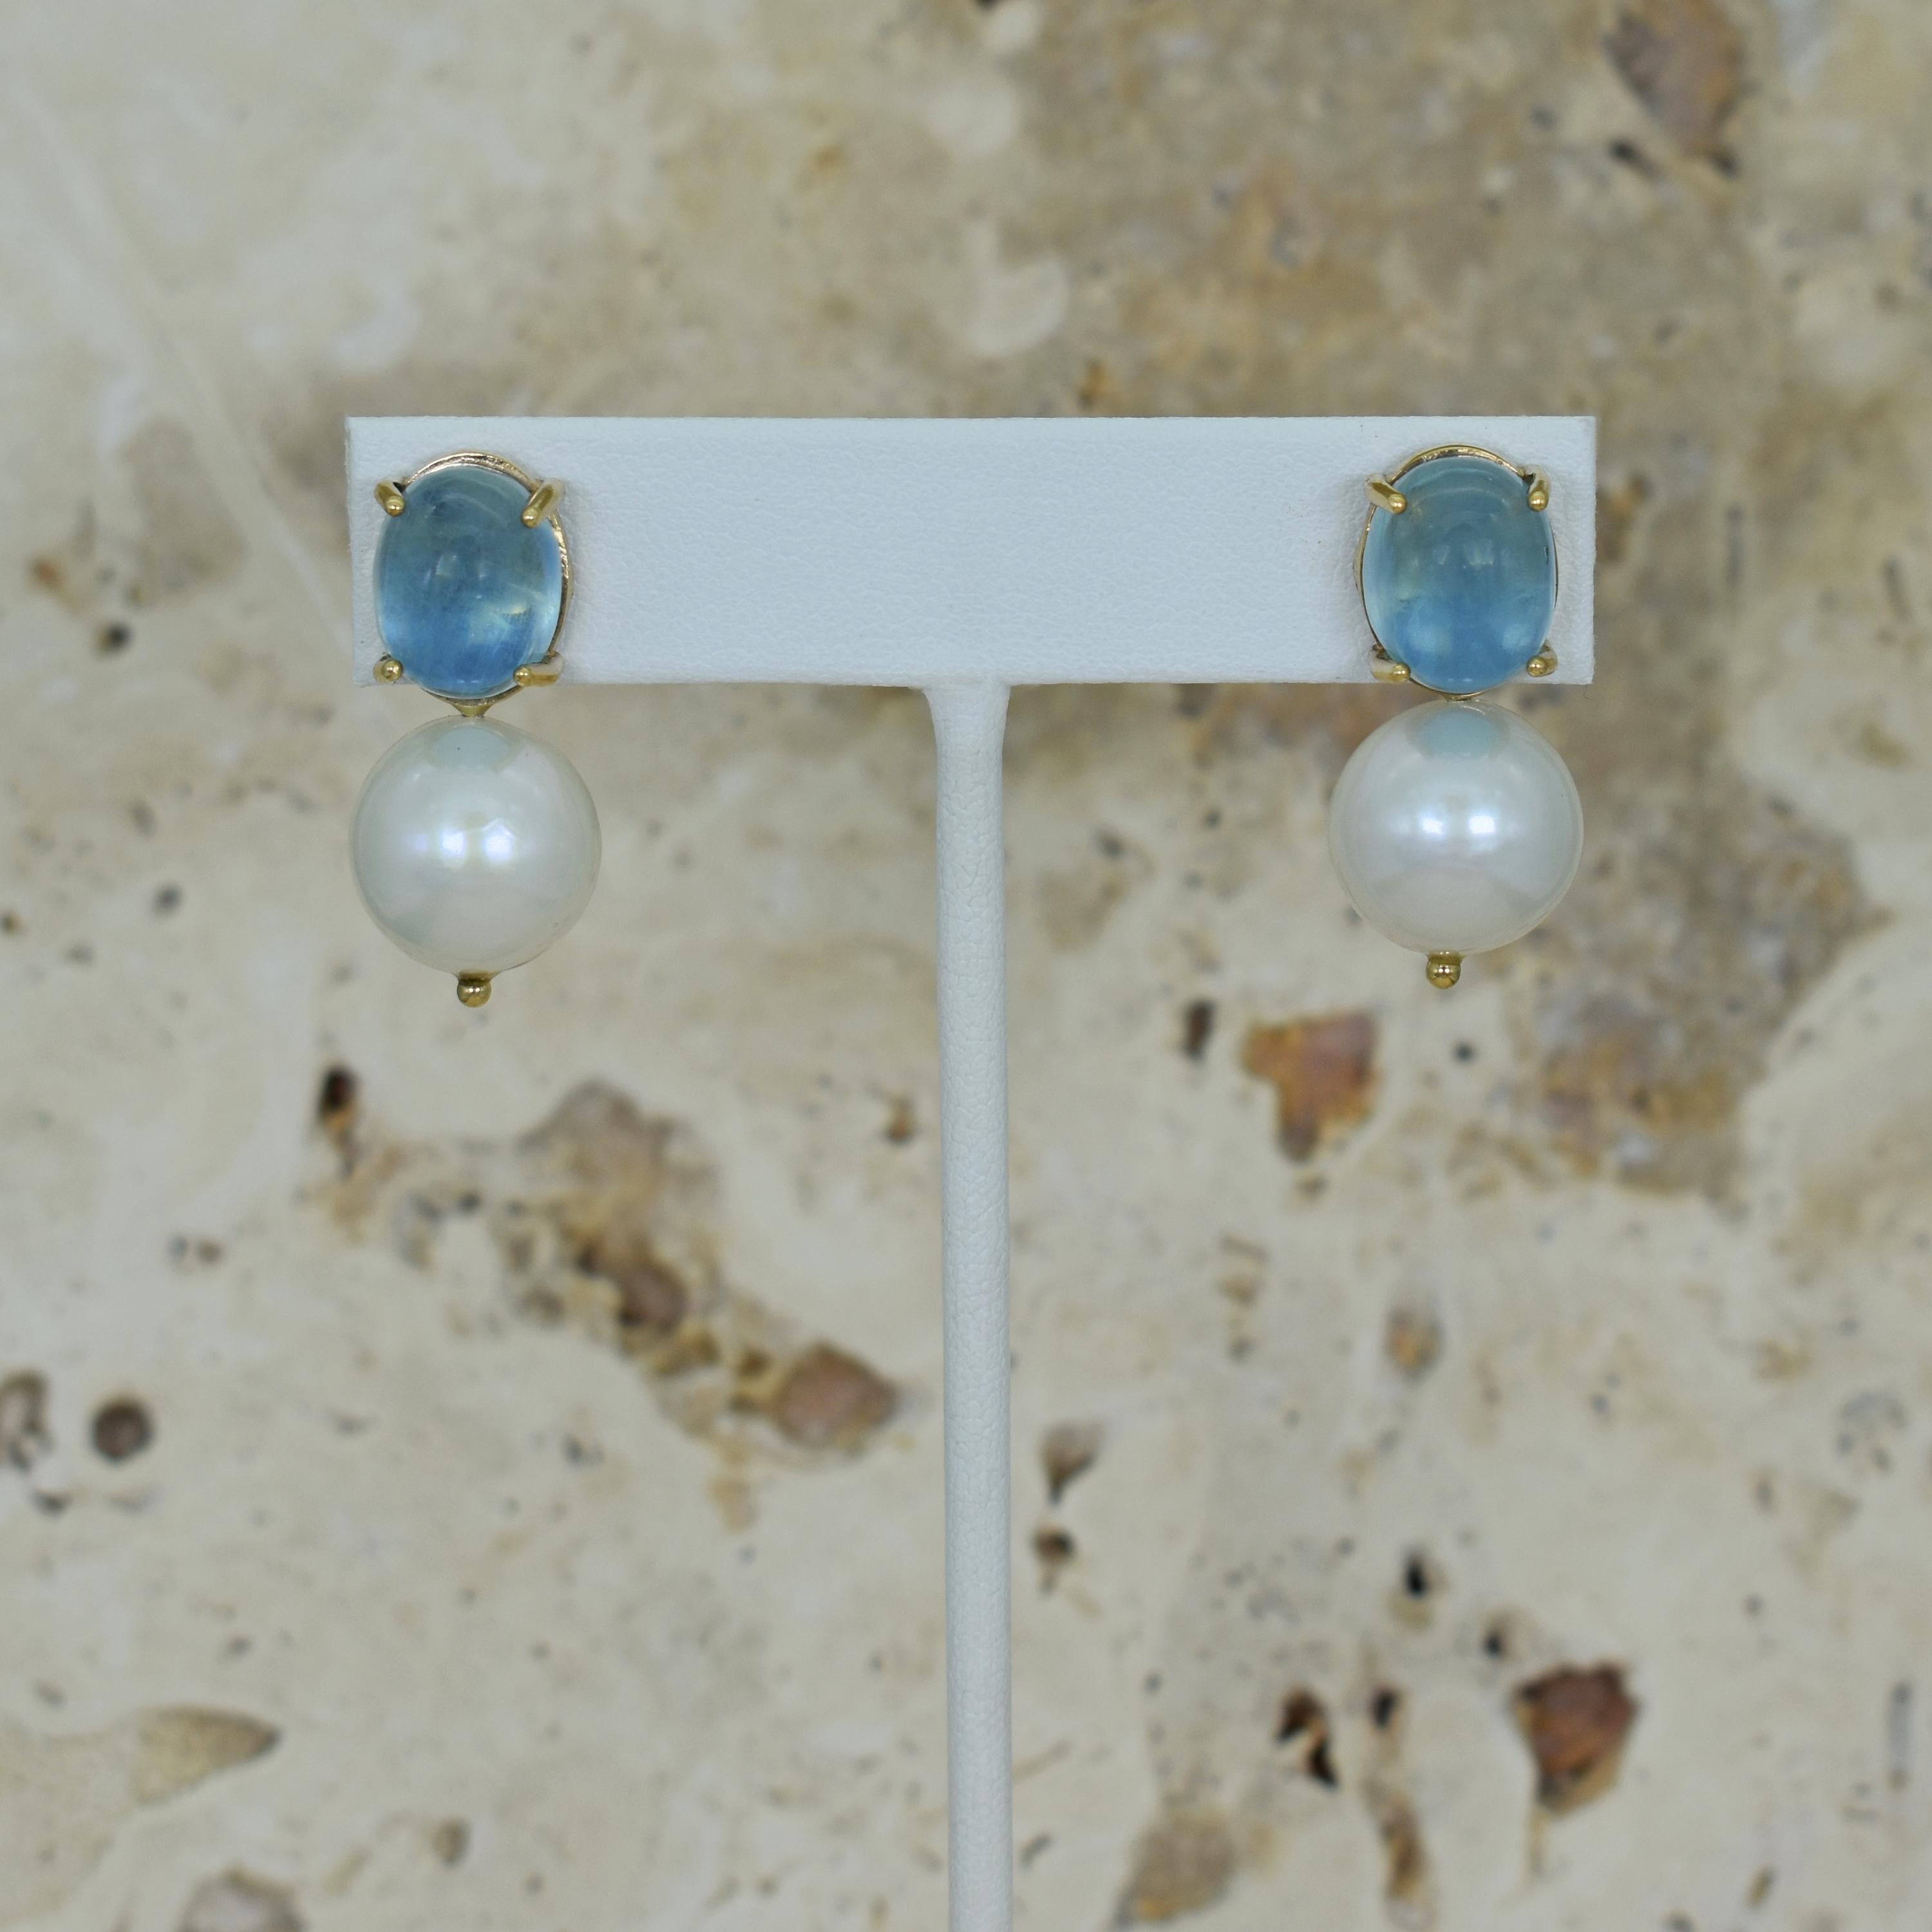 12.48 carat cabochon-cut Aquamarine and round, white 13mm Freshwater Pearl drop 14k yellow gold stud earrings. Stud earrings are 1.19 inches or 30mm in length. Gorgeous, blue Aquamarine and Pearl gemstones make these timeless yet contemporary